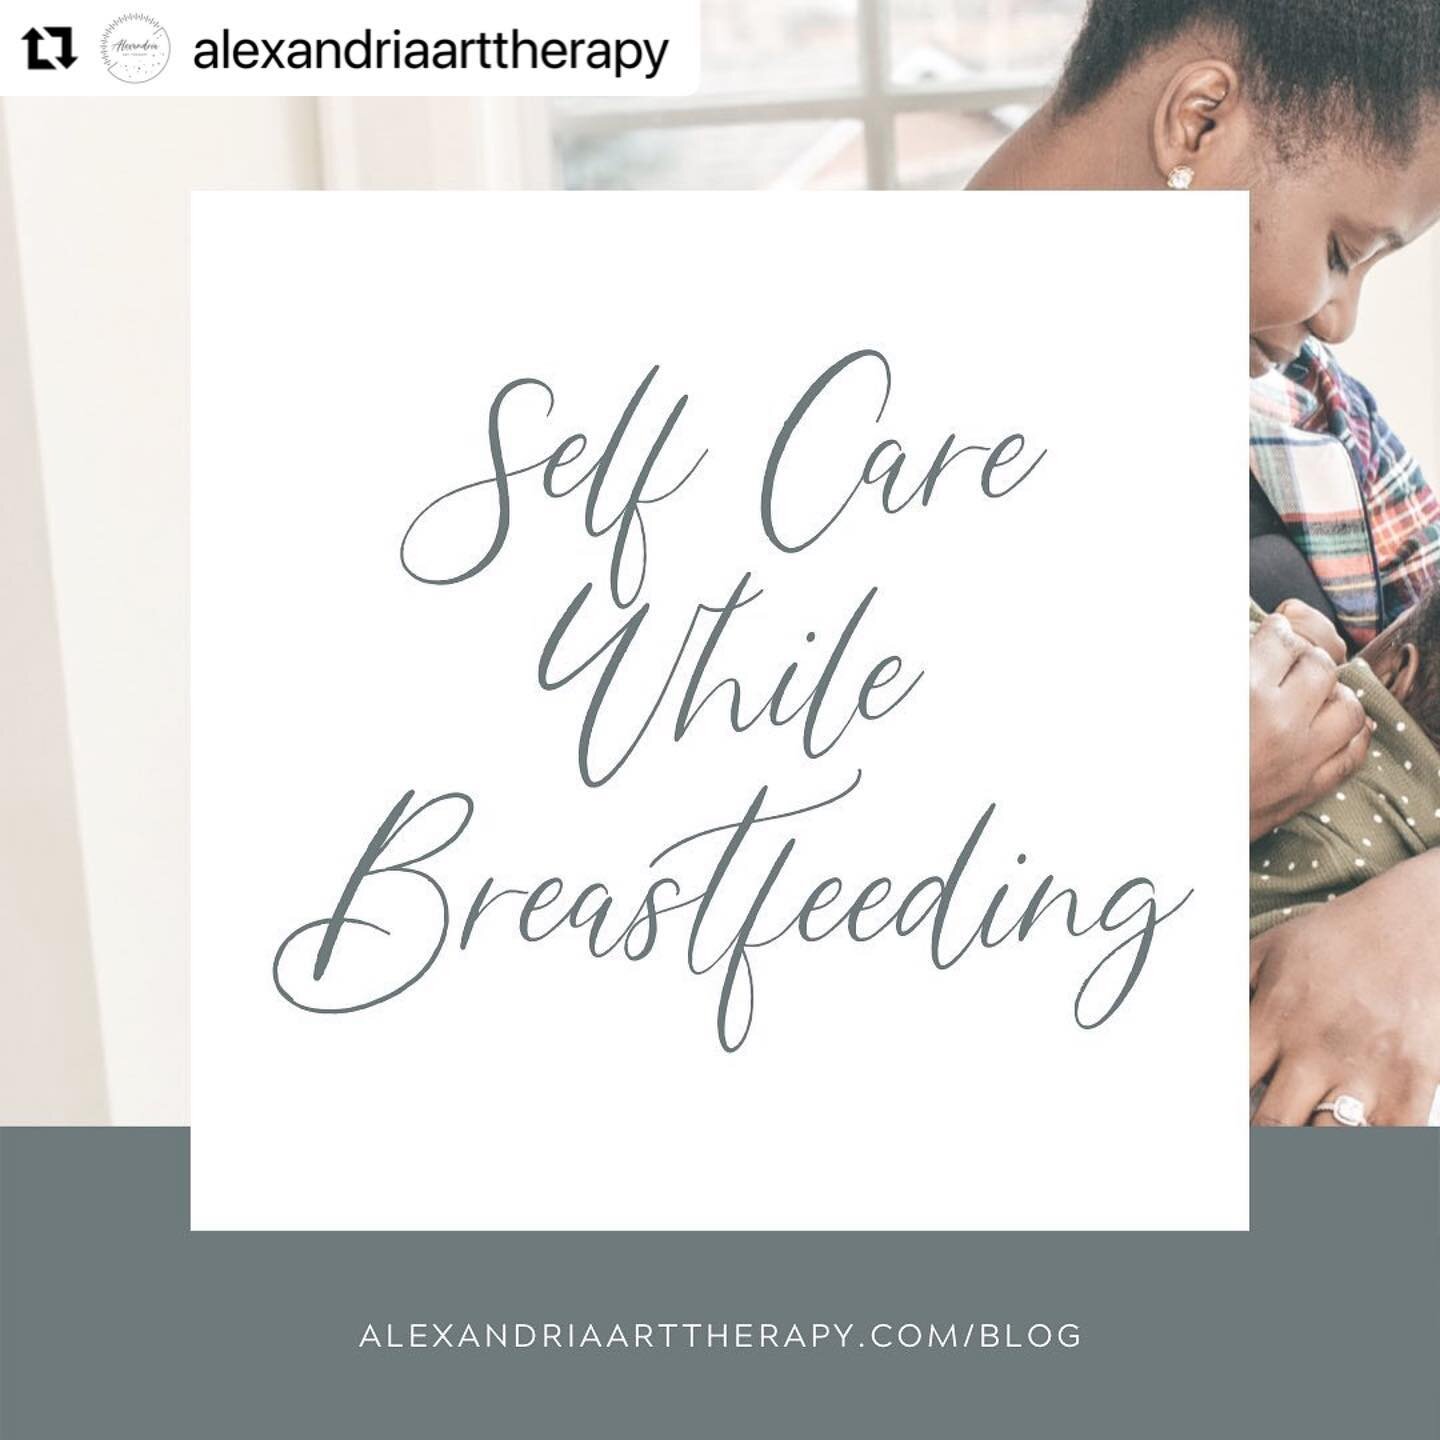 #Repost @alexandriaarttherapy 
・・・
New Blog: If you&rsquo;re a mom, you&rsquo;ve probably heard some well-meaning person ruminate that they don&rsquo;t understand why every mother doesn&rsquo;t breastfeed because it&rsquo;s free. And formula is so ex